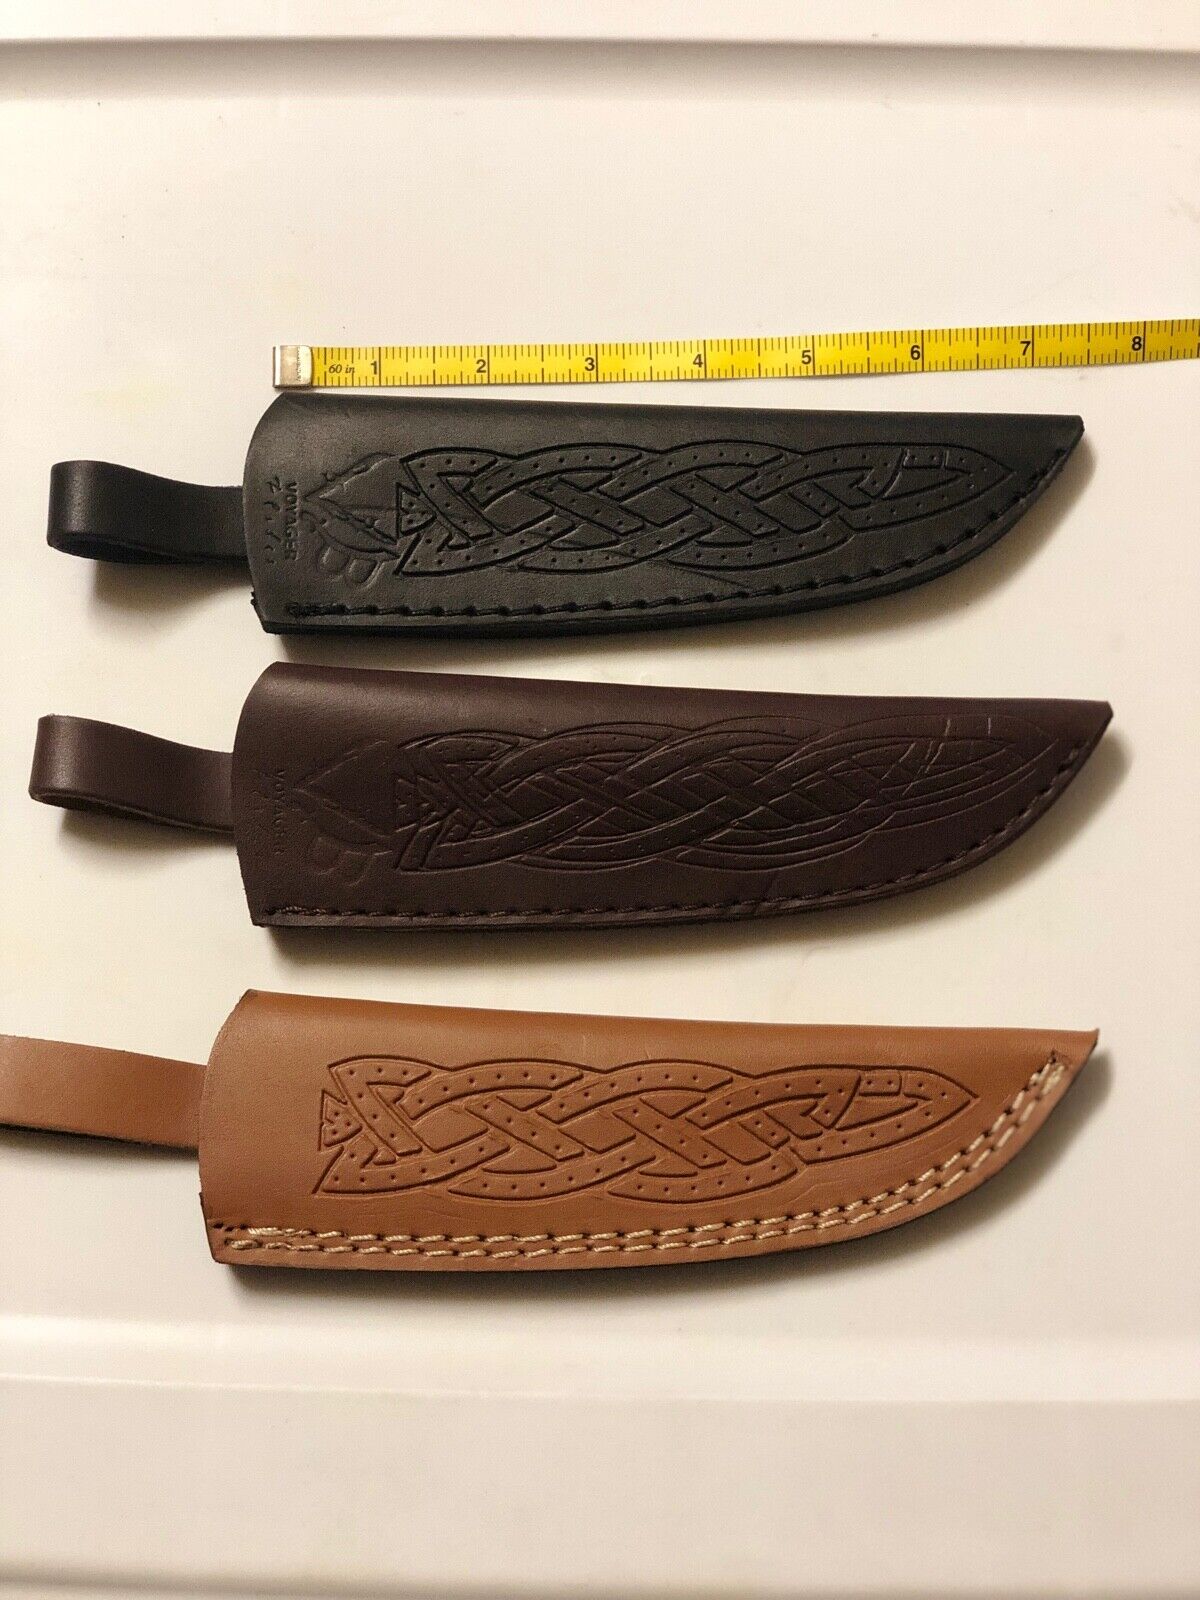 3 pcs lot beautiful cowhide leather sheath fits 6-10 inches skinner knife